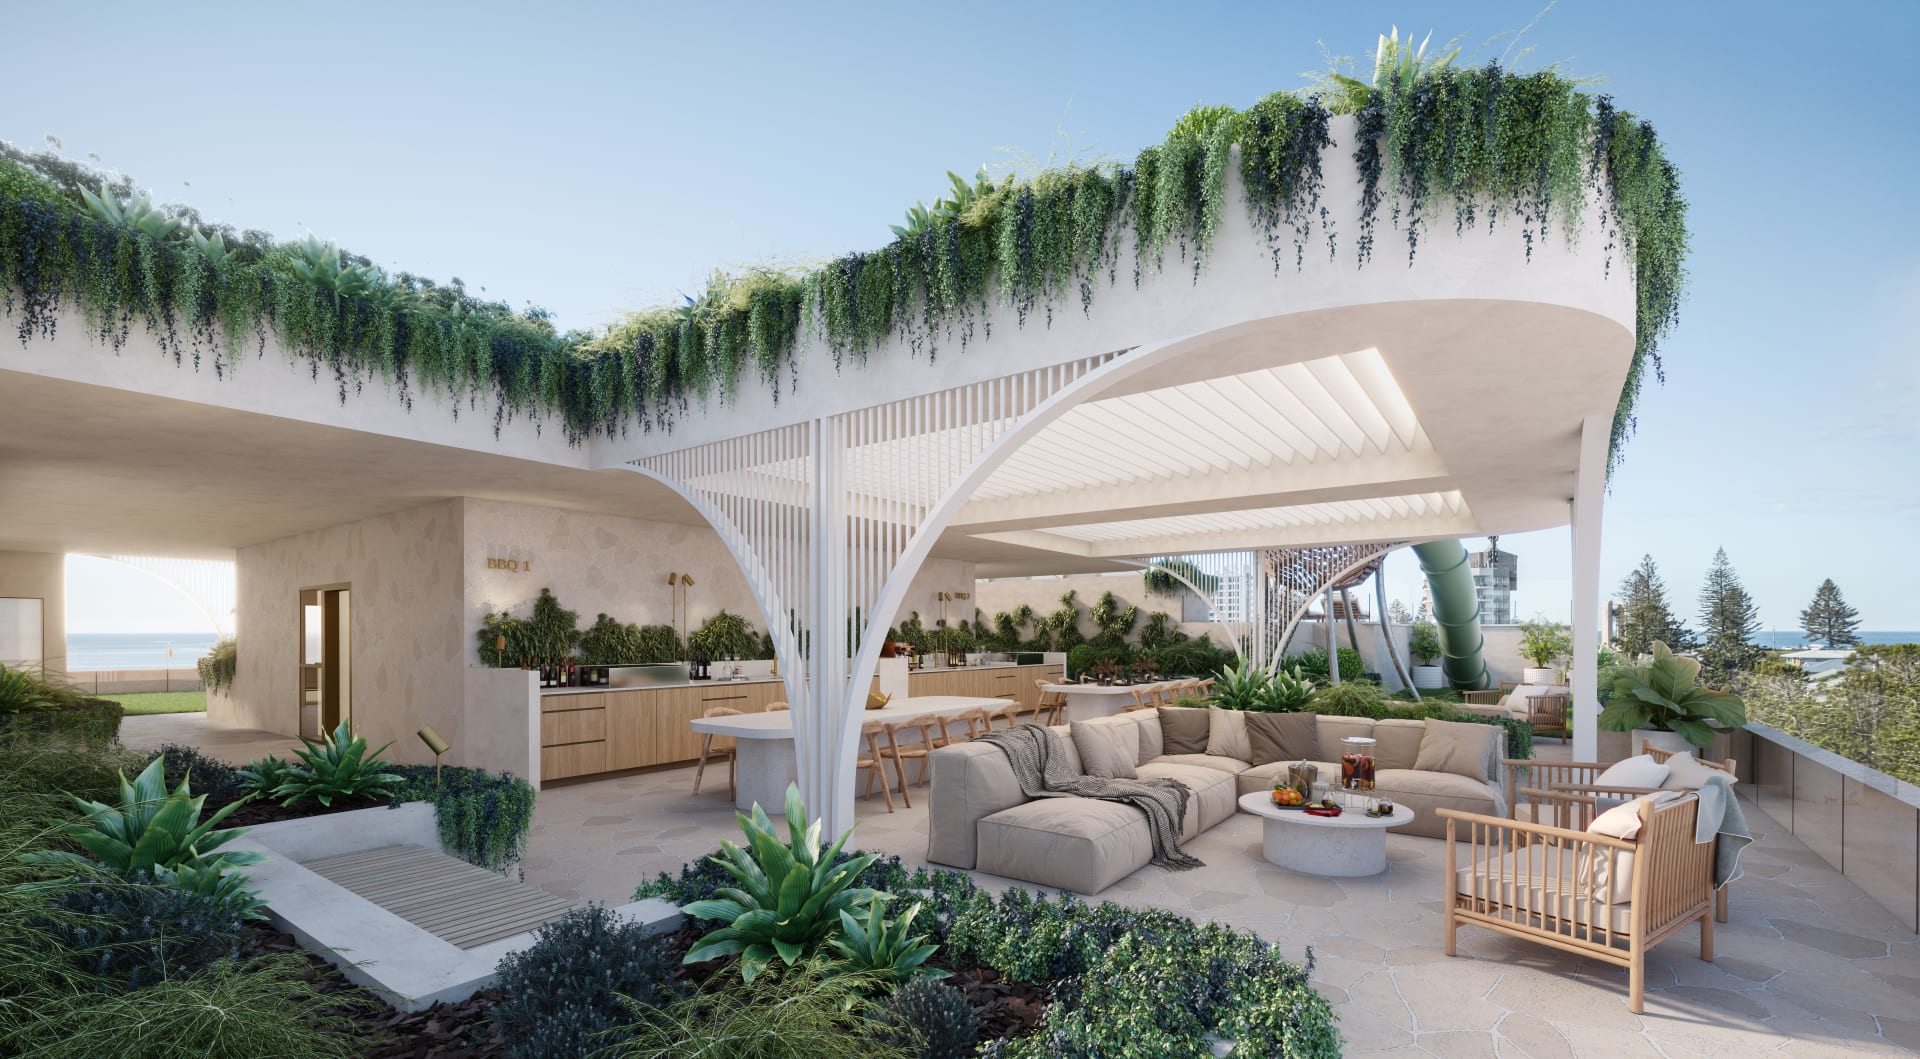 Club Esprit: The ultimate rooftop retreat for wellness and self-care